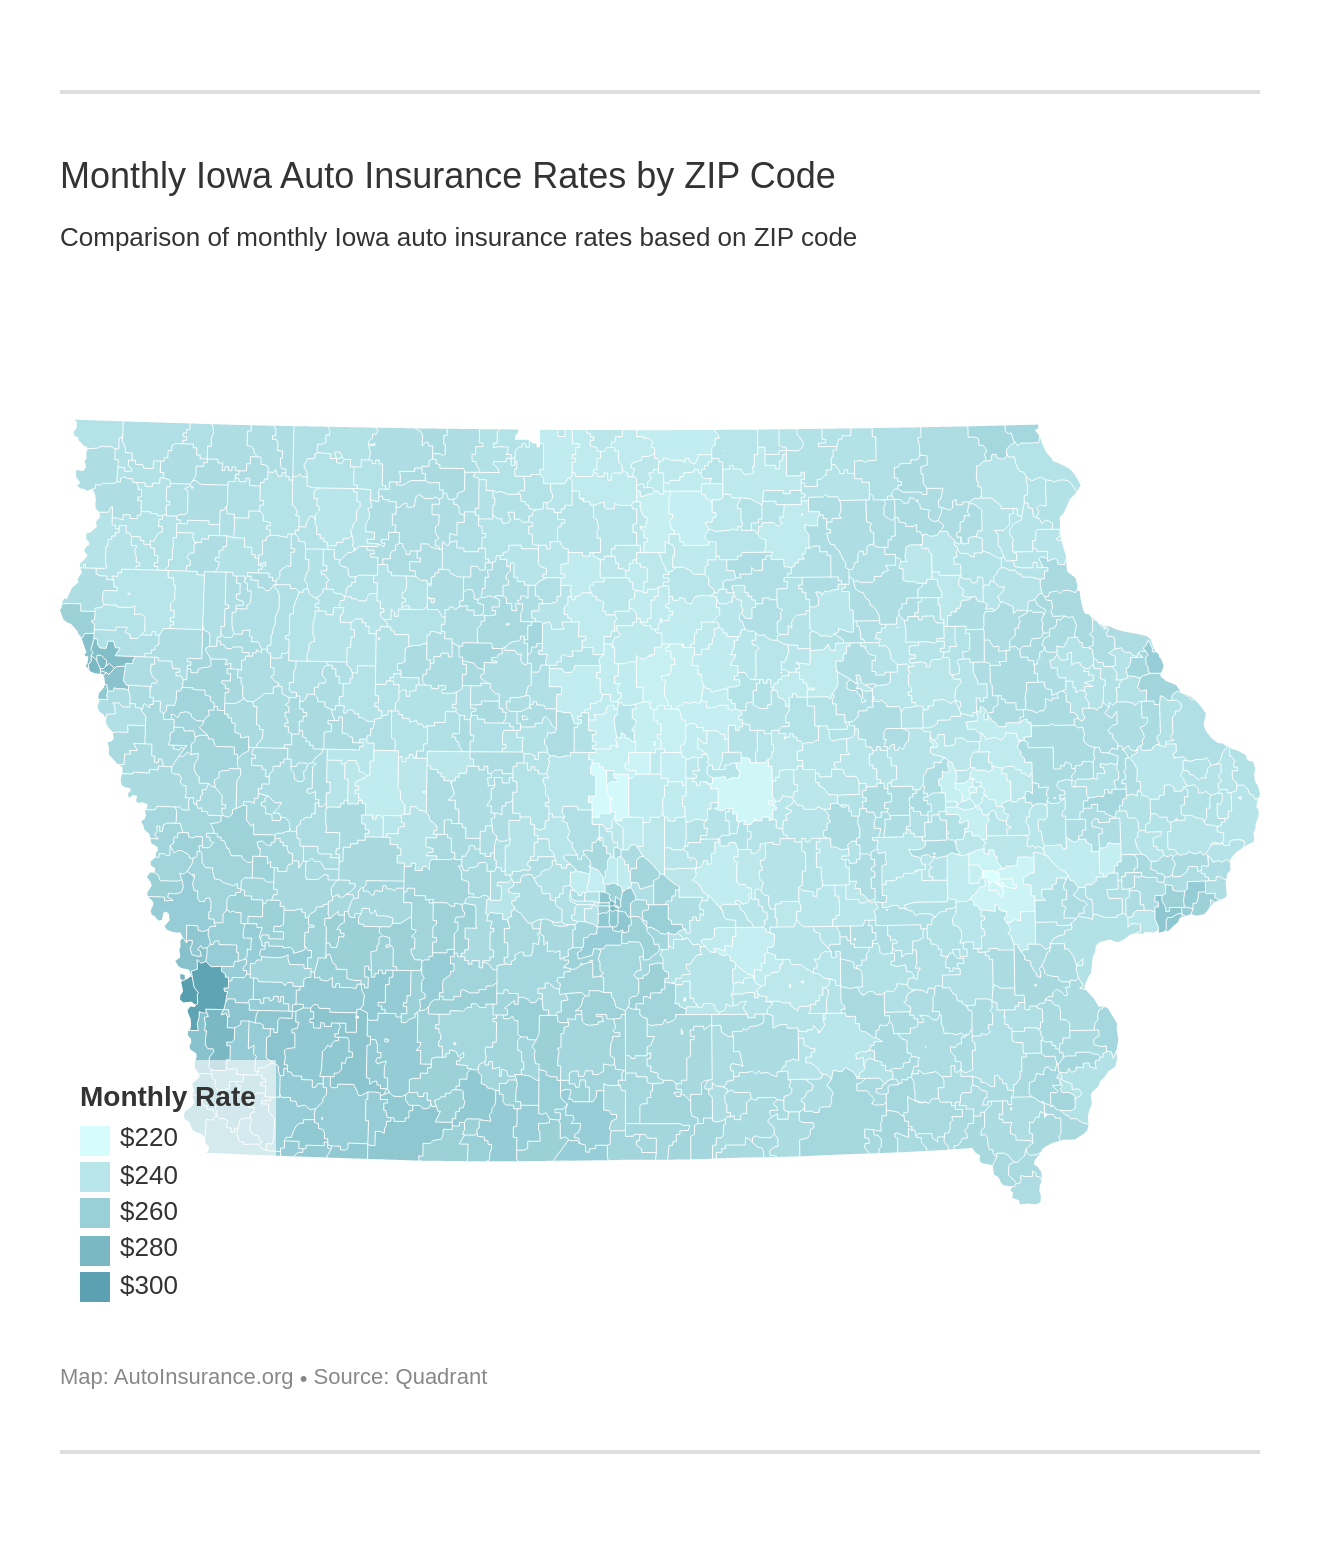 Monthly Iowa Auto Insurance Rates by ZIP Code